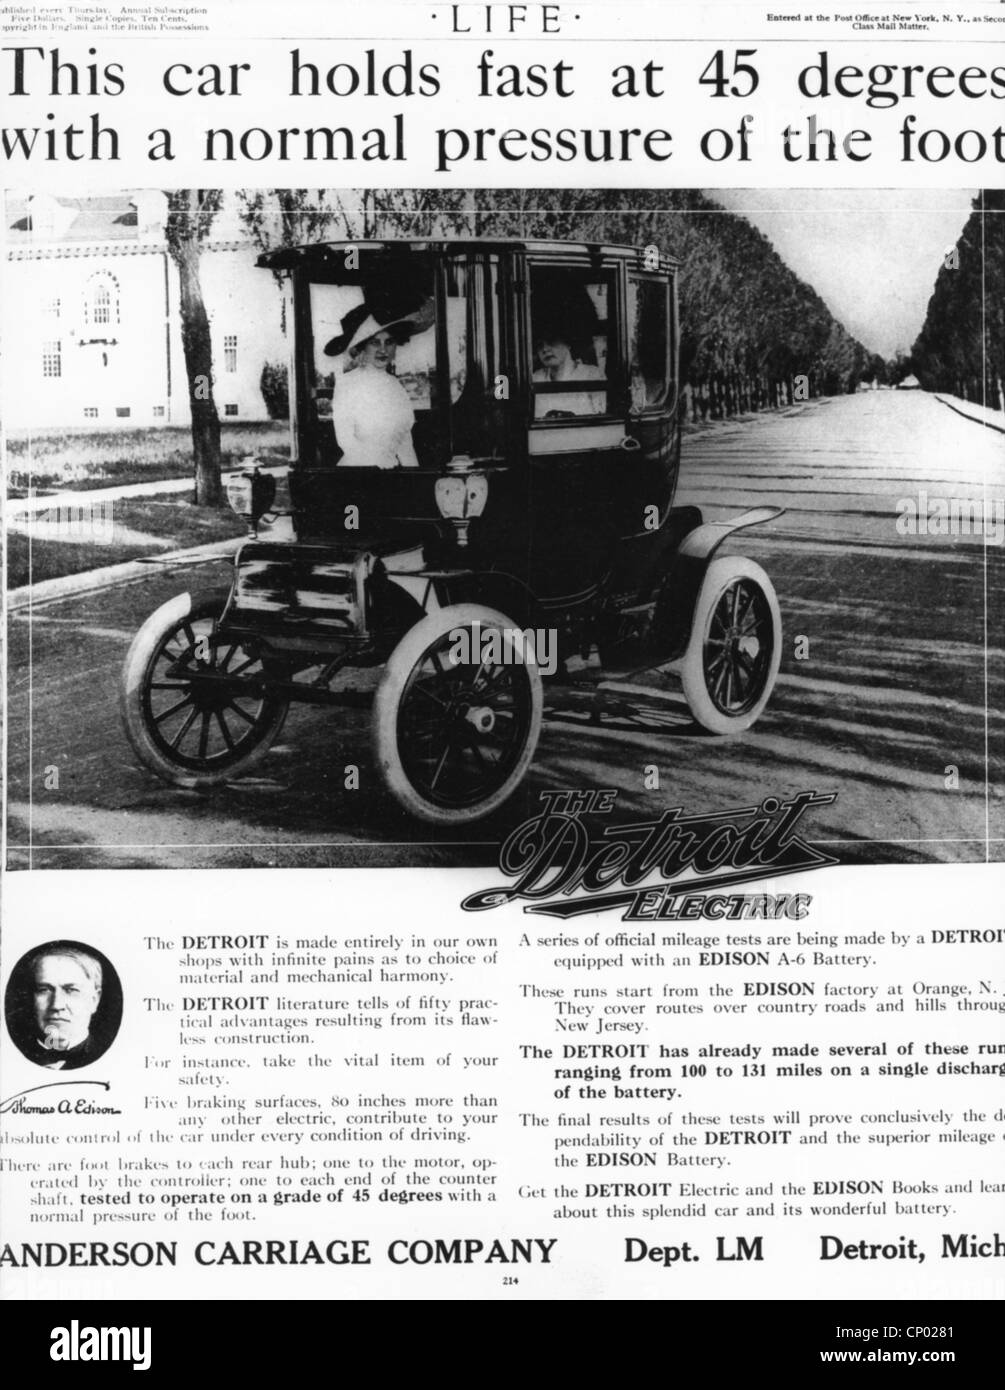 advertising, cars, Detroit Electric, battery powered electric car of Anderson Carriage Company, Detroit, advert, 'Life', New York, 1907, , Additional-Rights-Clearences-Not Available Stock Photo